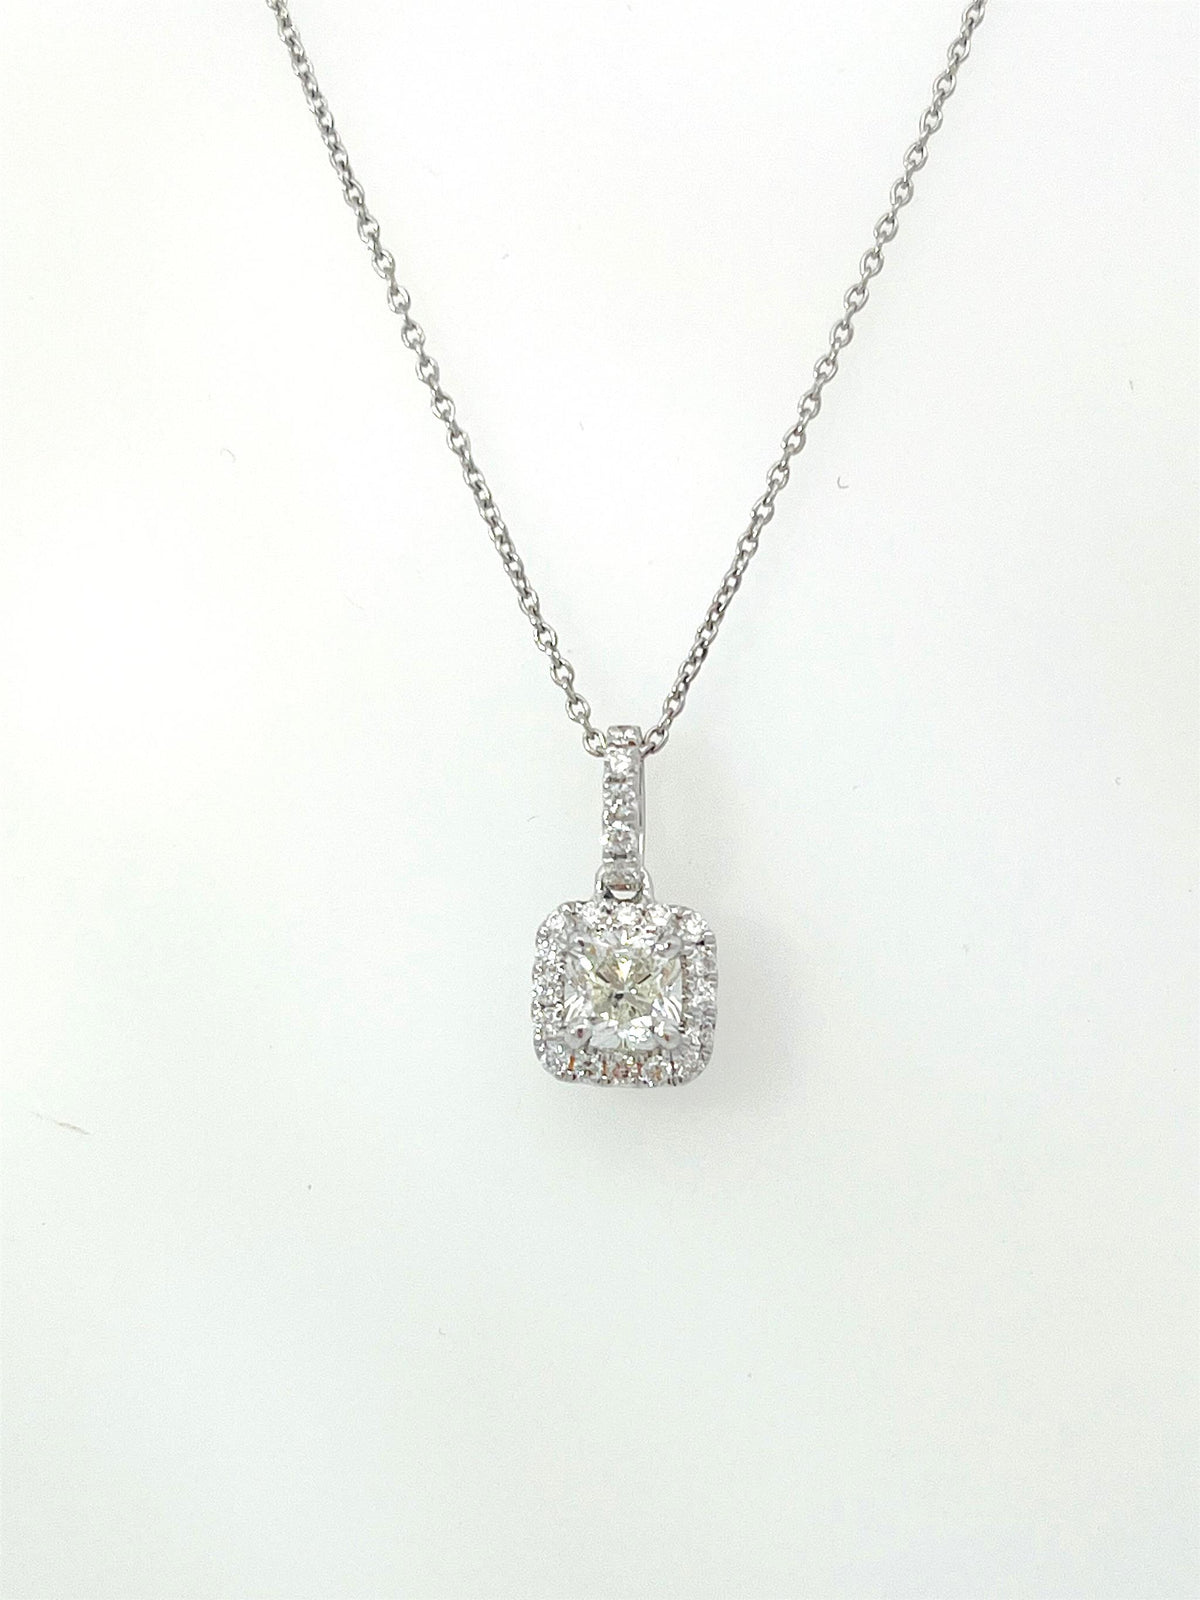 14Kt White Gold Halo Pendant With .50cttw Natural Cushion Center Diamond